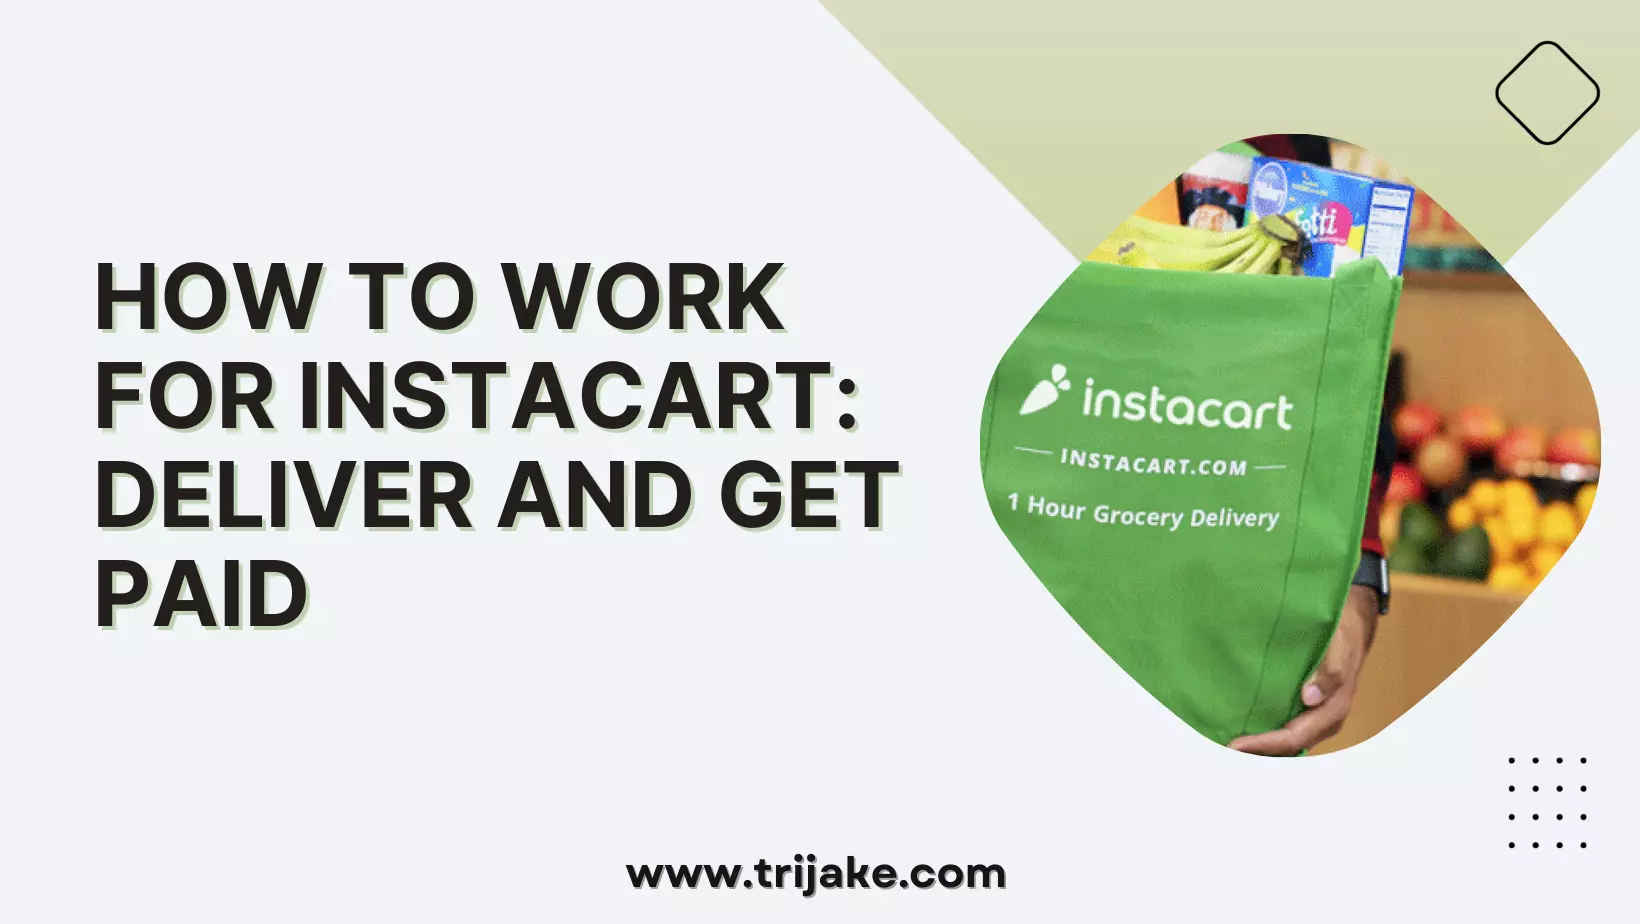 How to Work for Instacart